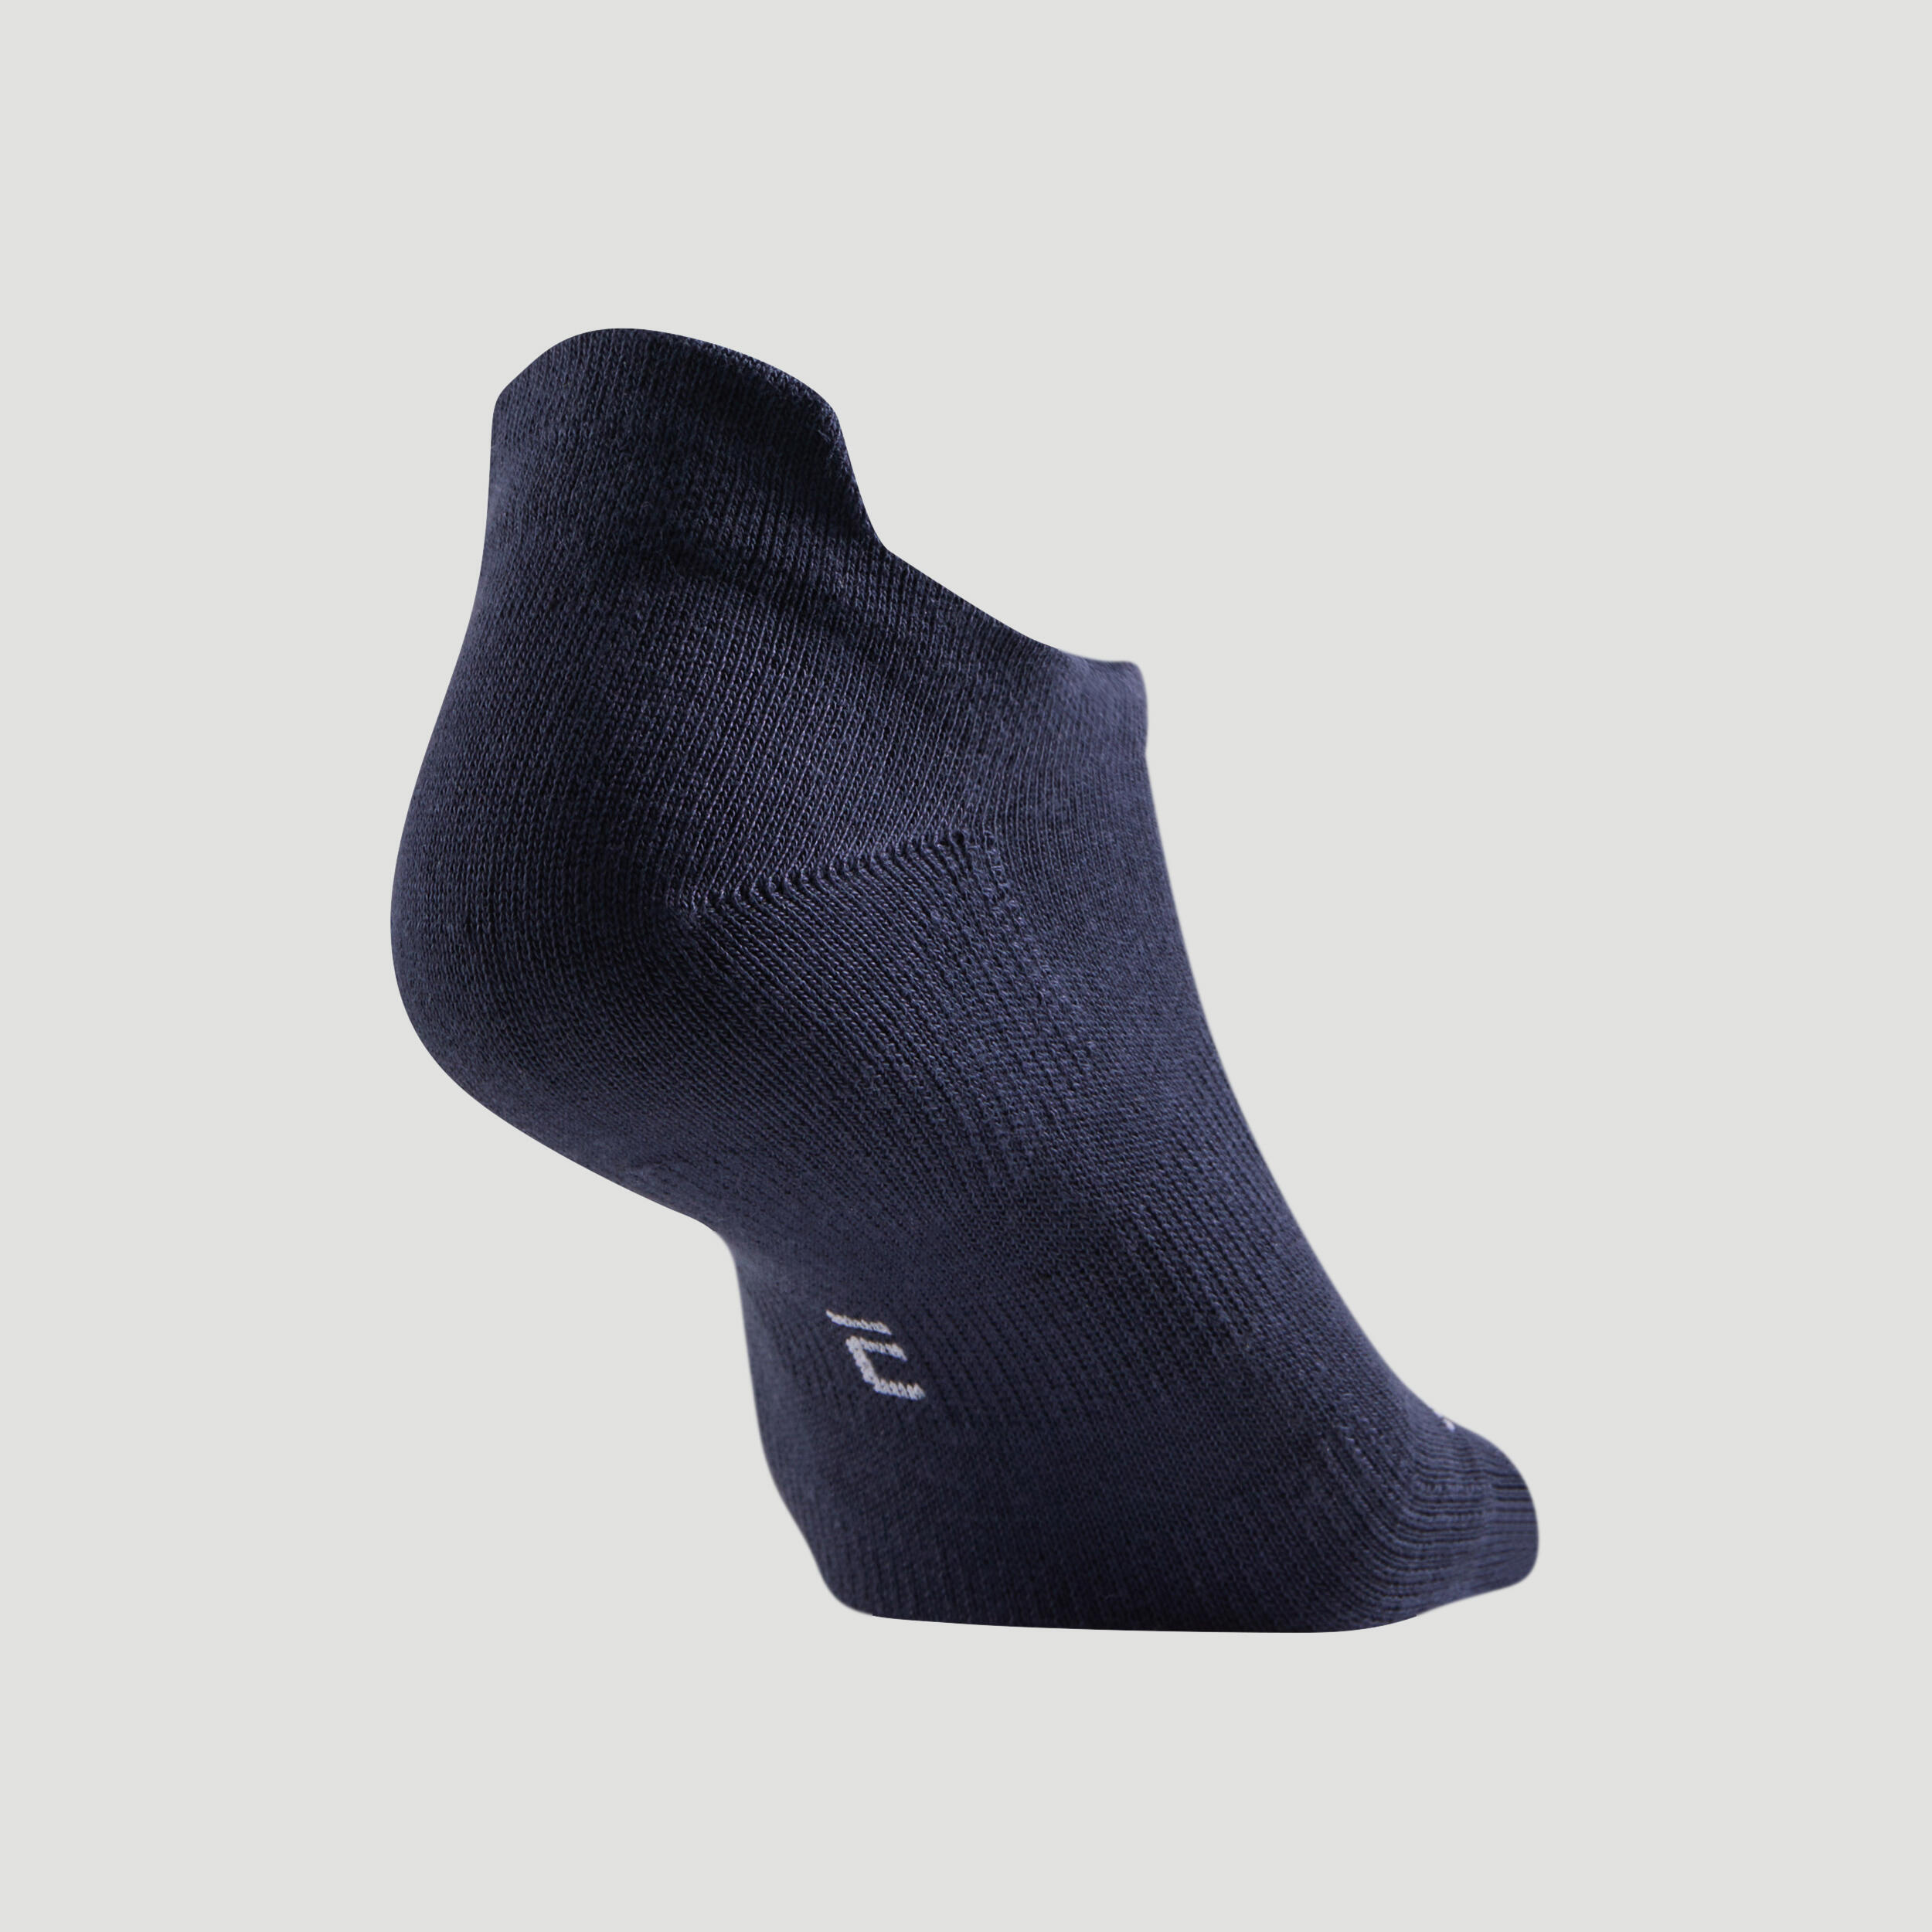 Low Sports Socks RS 160 Tri-Pack - Navy 4/6